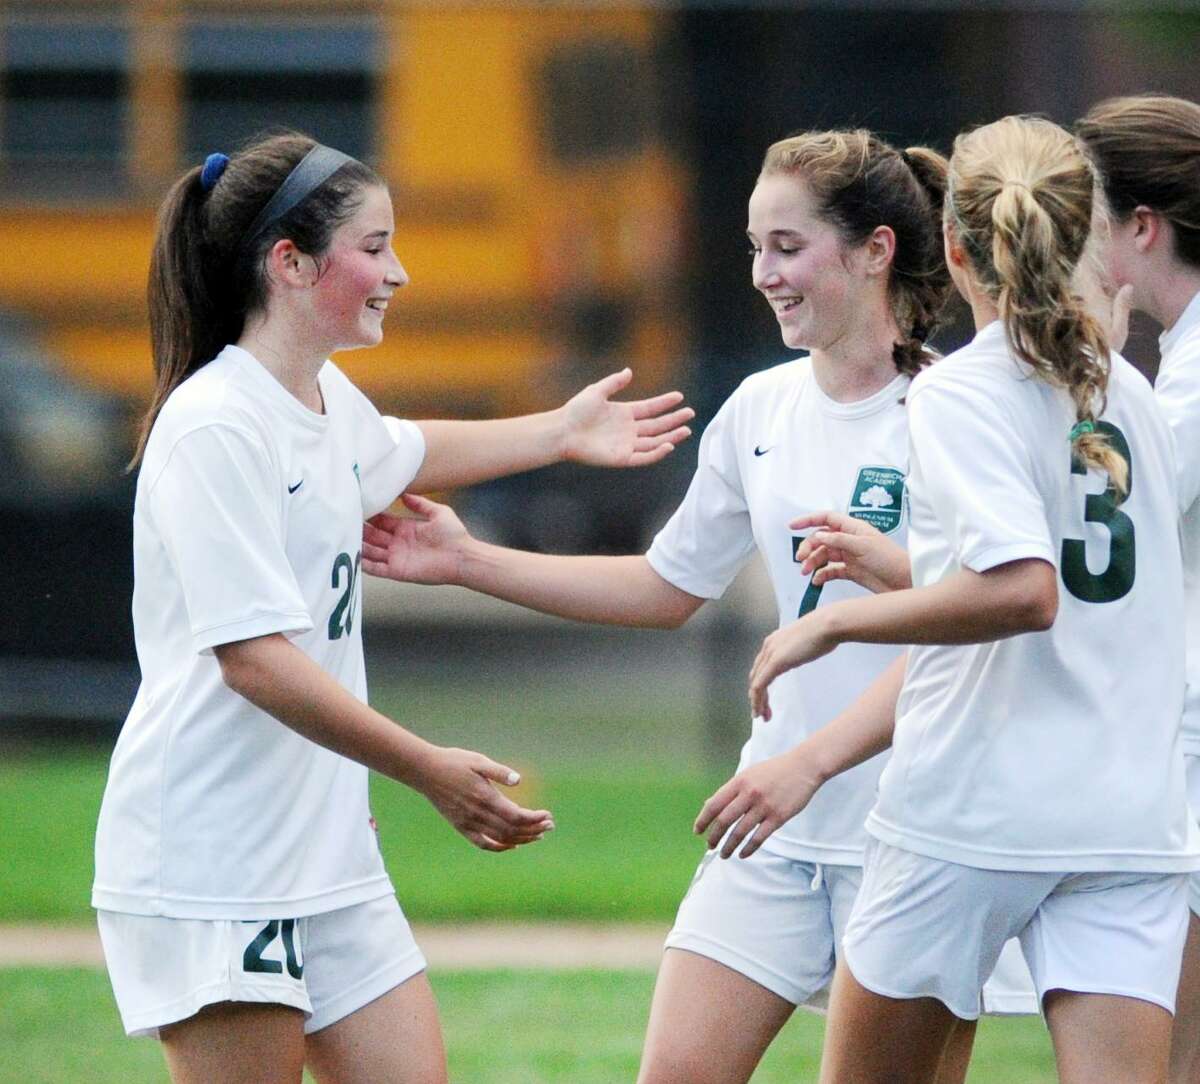 Taylor Lane, (#20), left, and Katie Goldsmith, (#3), right, congratulate their Greenwich Academy teammate Tessa Brooks, center, after Brooks scored a goal during the first half of the girls high school soccer match between King School and Greenwich Academy at King in Stamford, Conn., Thursday, Sept. 14, 2017. GA defeated King, 6-0.